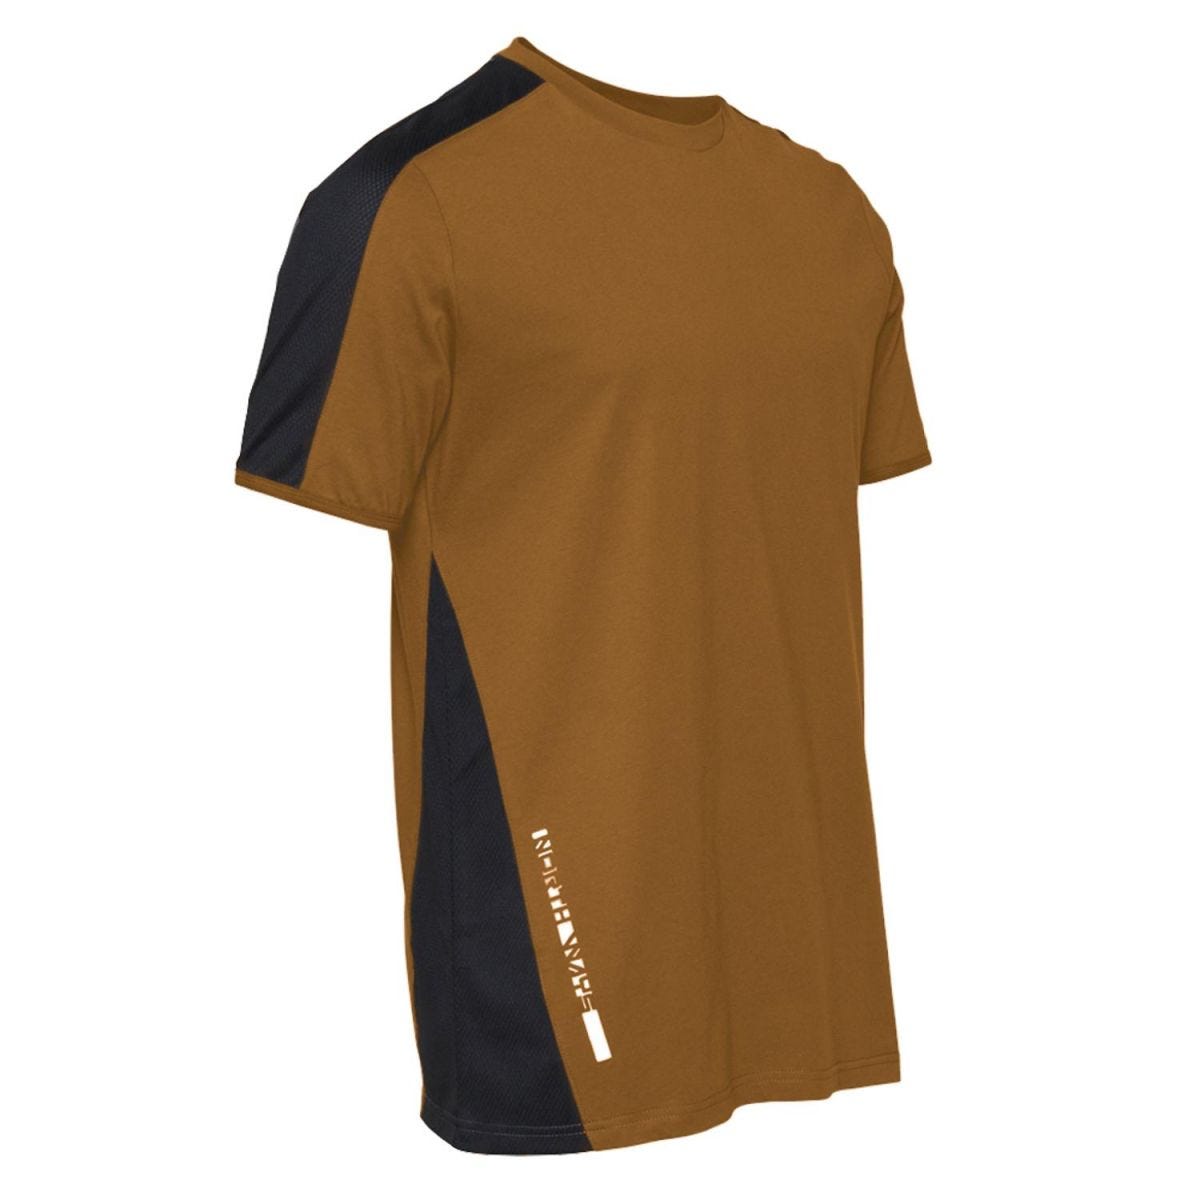 Tee-shirt à manches courtes pour homme Andy camel - North Ways - Taille 2XL 2